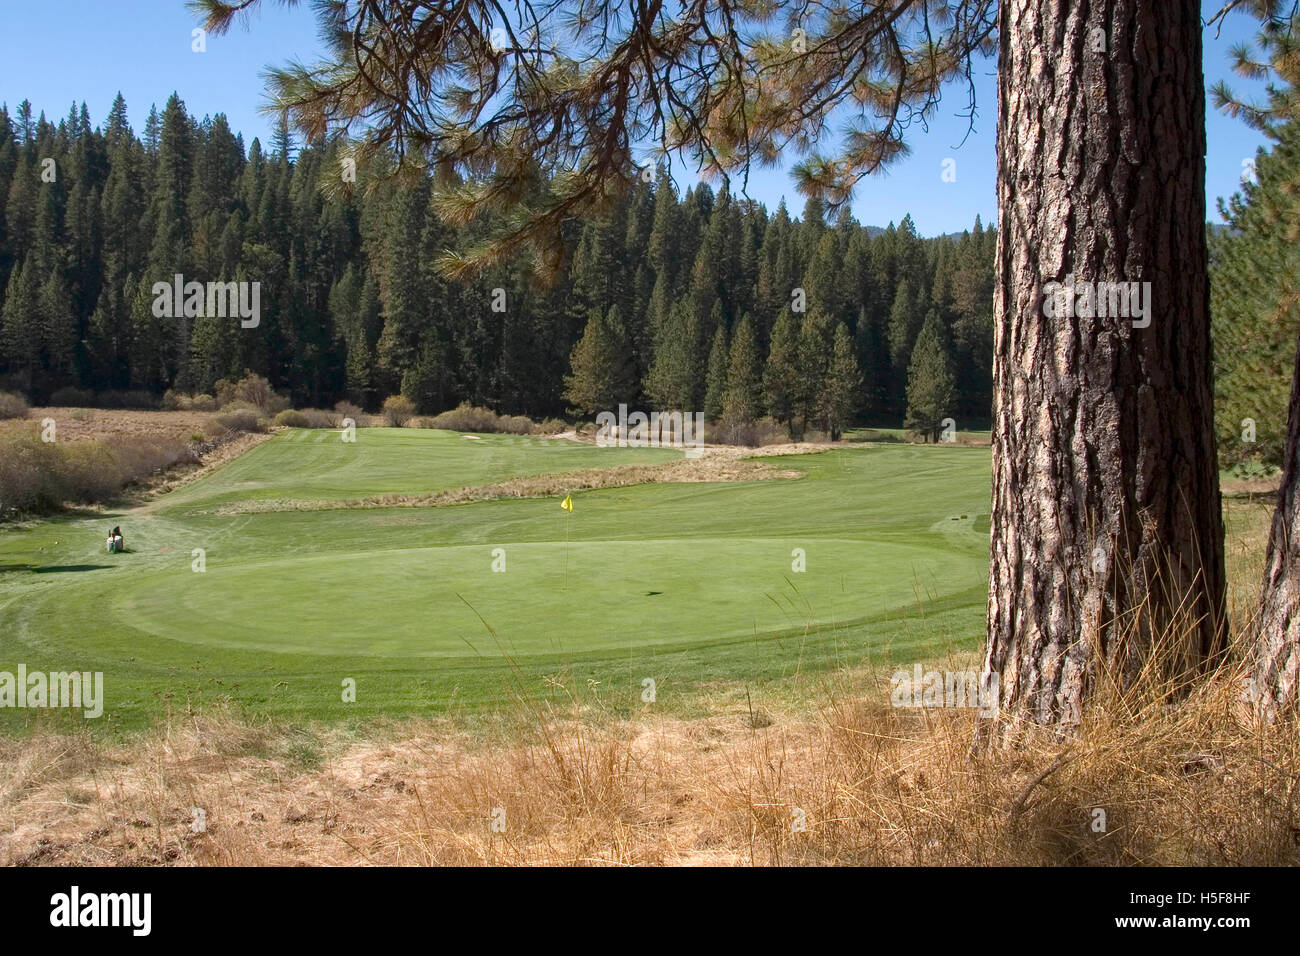 Dec 01, 2005; Wawona, CA, USA; Yosemite's Wawona Golf Course was the first regulation course in the Sierra Nevada when it opened in 1918 -- and has provided golfers challenging but rewarding rounds ever since. It was designed by Walter Fovargue to blend seamlessly into its spectacular surroundings. The nine-hole, par-35 course measures 3,050 yards and includes two par five holes and three par three holes. Different tee positions per side provide a par 70, 18-hole format. Golfers of every level enjoy the rolling terrain, variety of challenging holes and tranquil setting of this historic course. Stock Photo